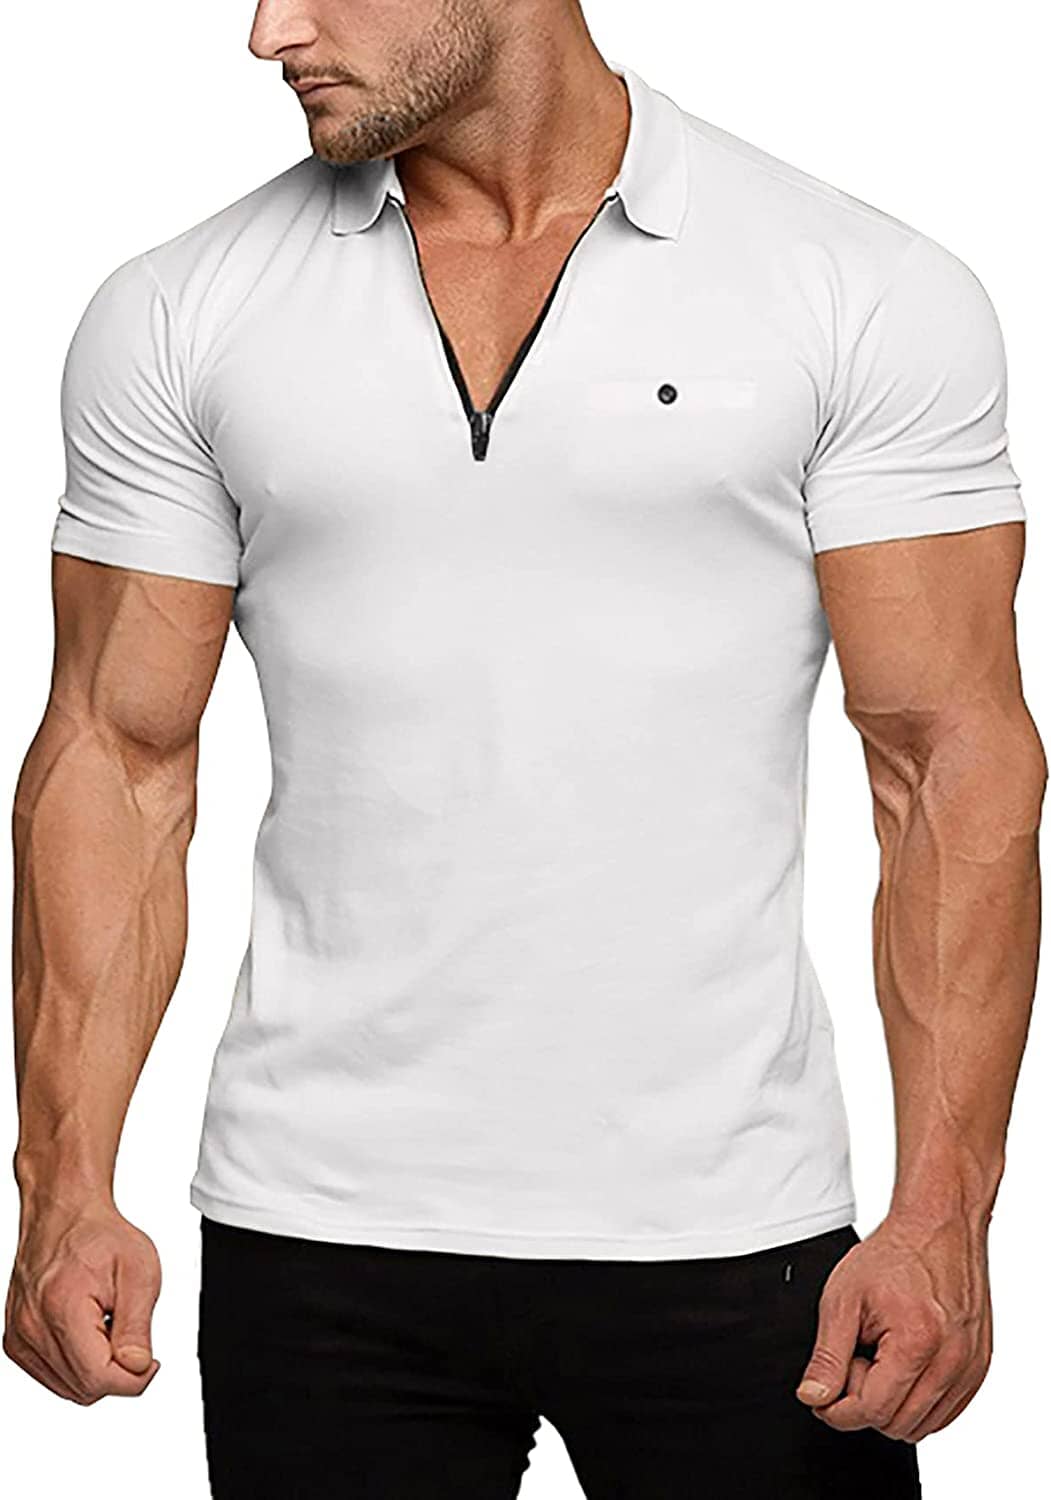 Slim Fit Zipper Polo Golf Shirt (US Only) Polos COOFANDY Store White S 